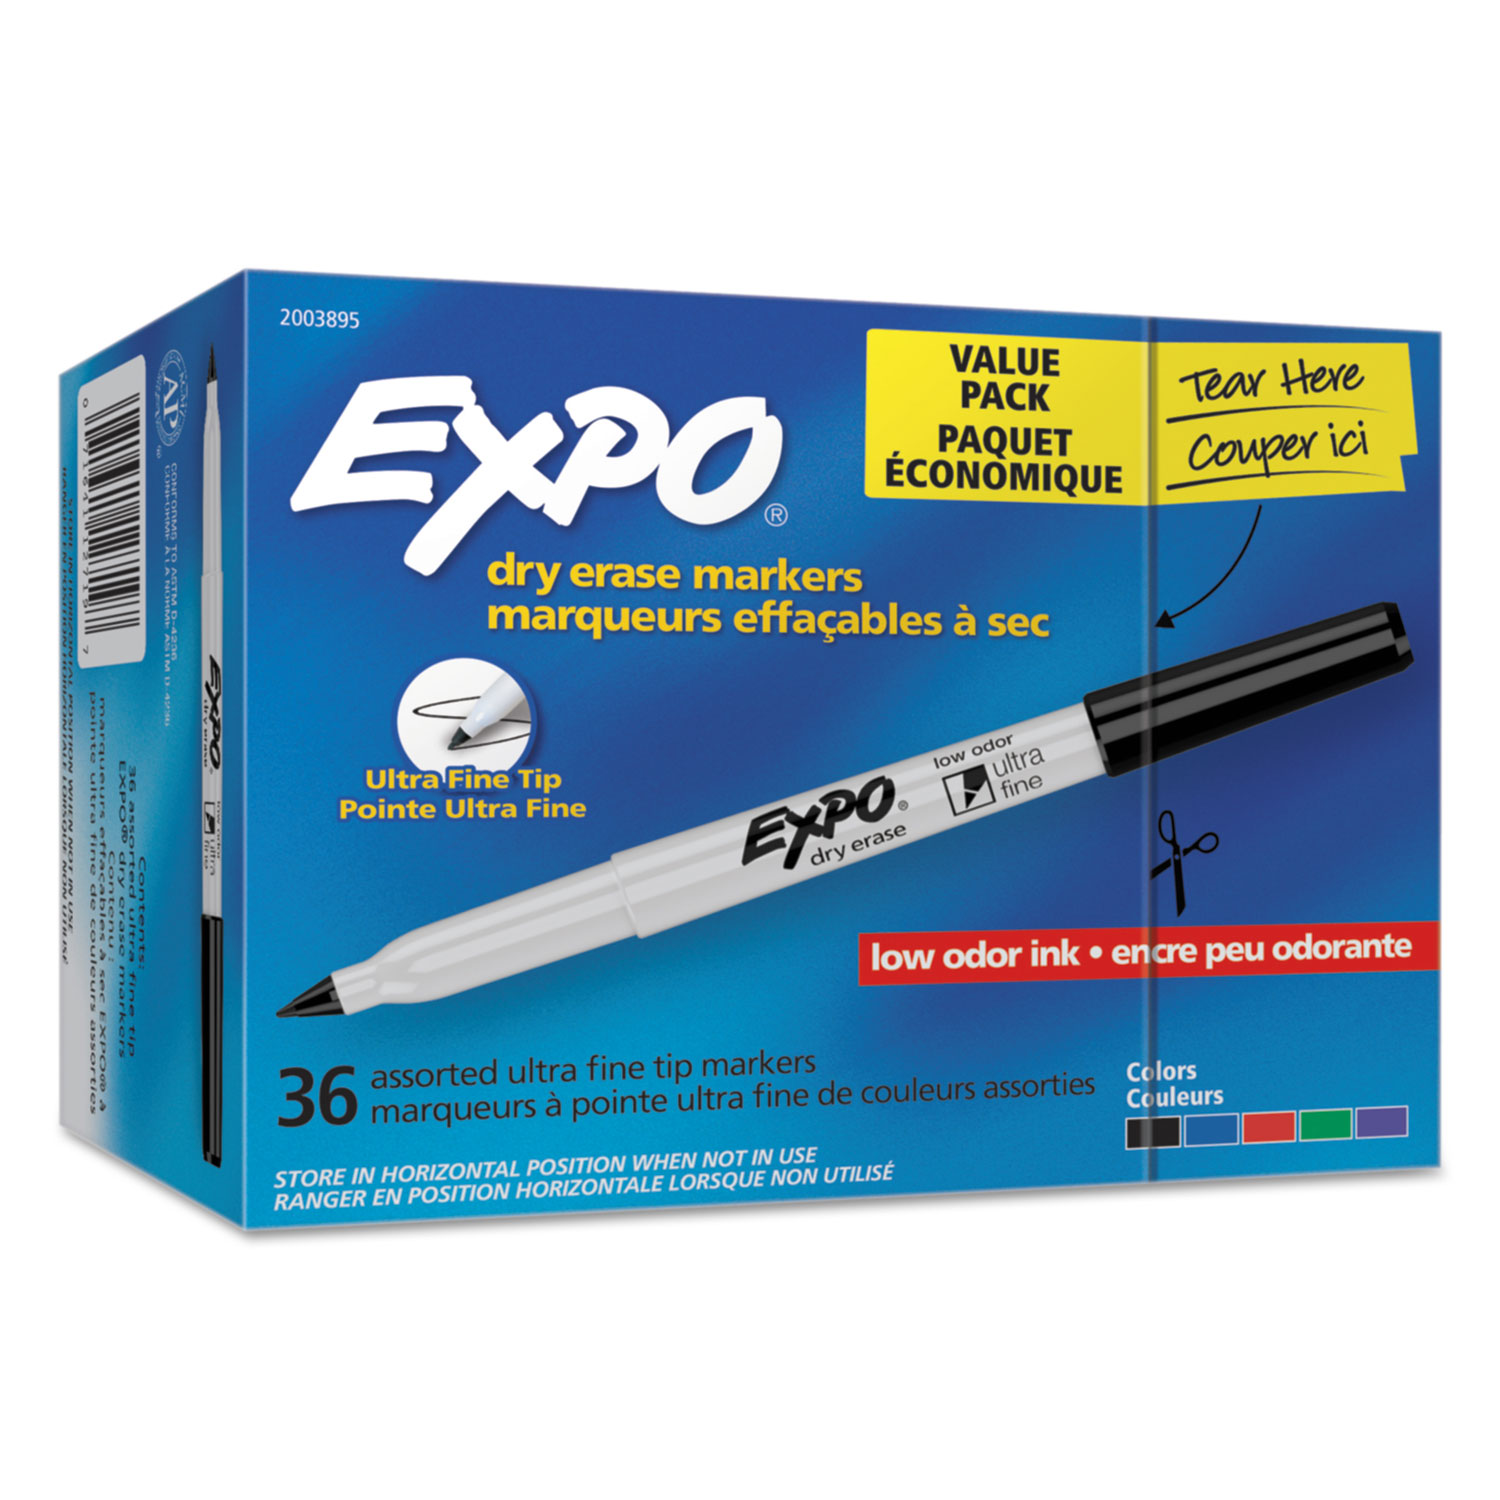 Extra Fine Needle Tip 4-Count Expo Low Odor Dry Erase Marker Assorted Colors